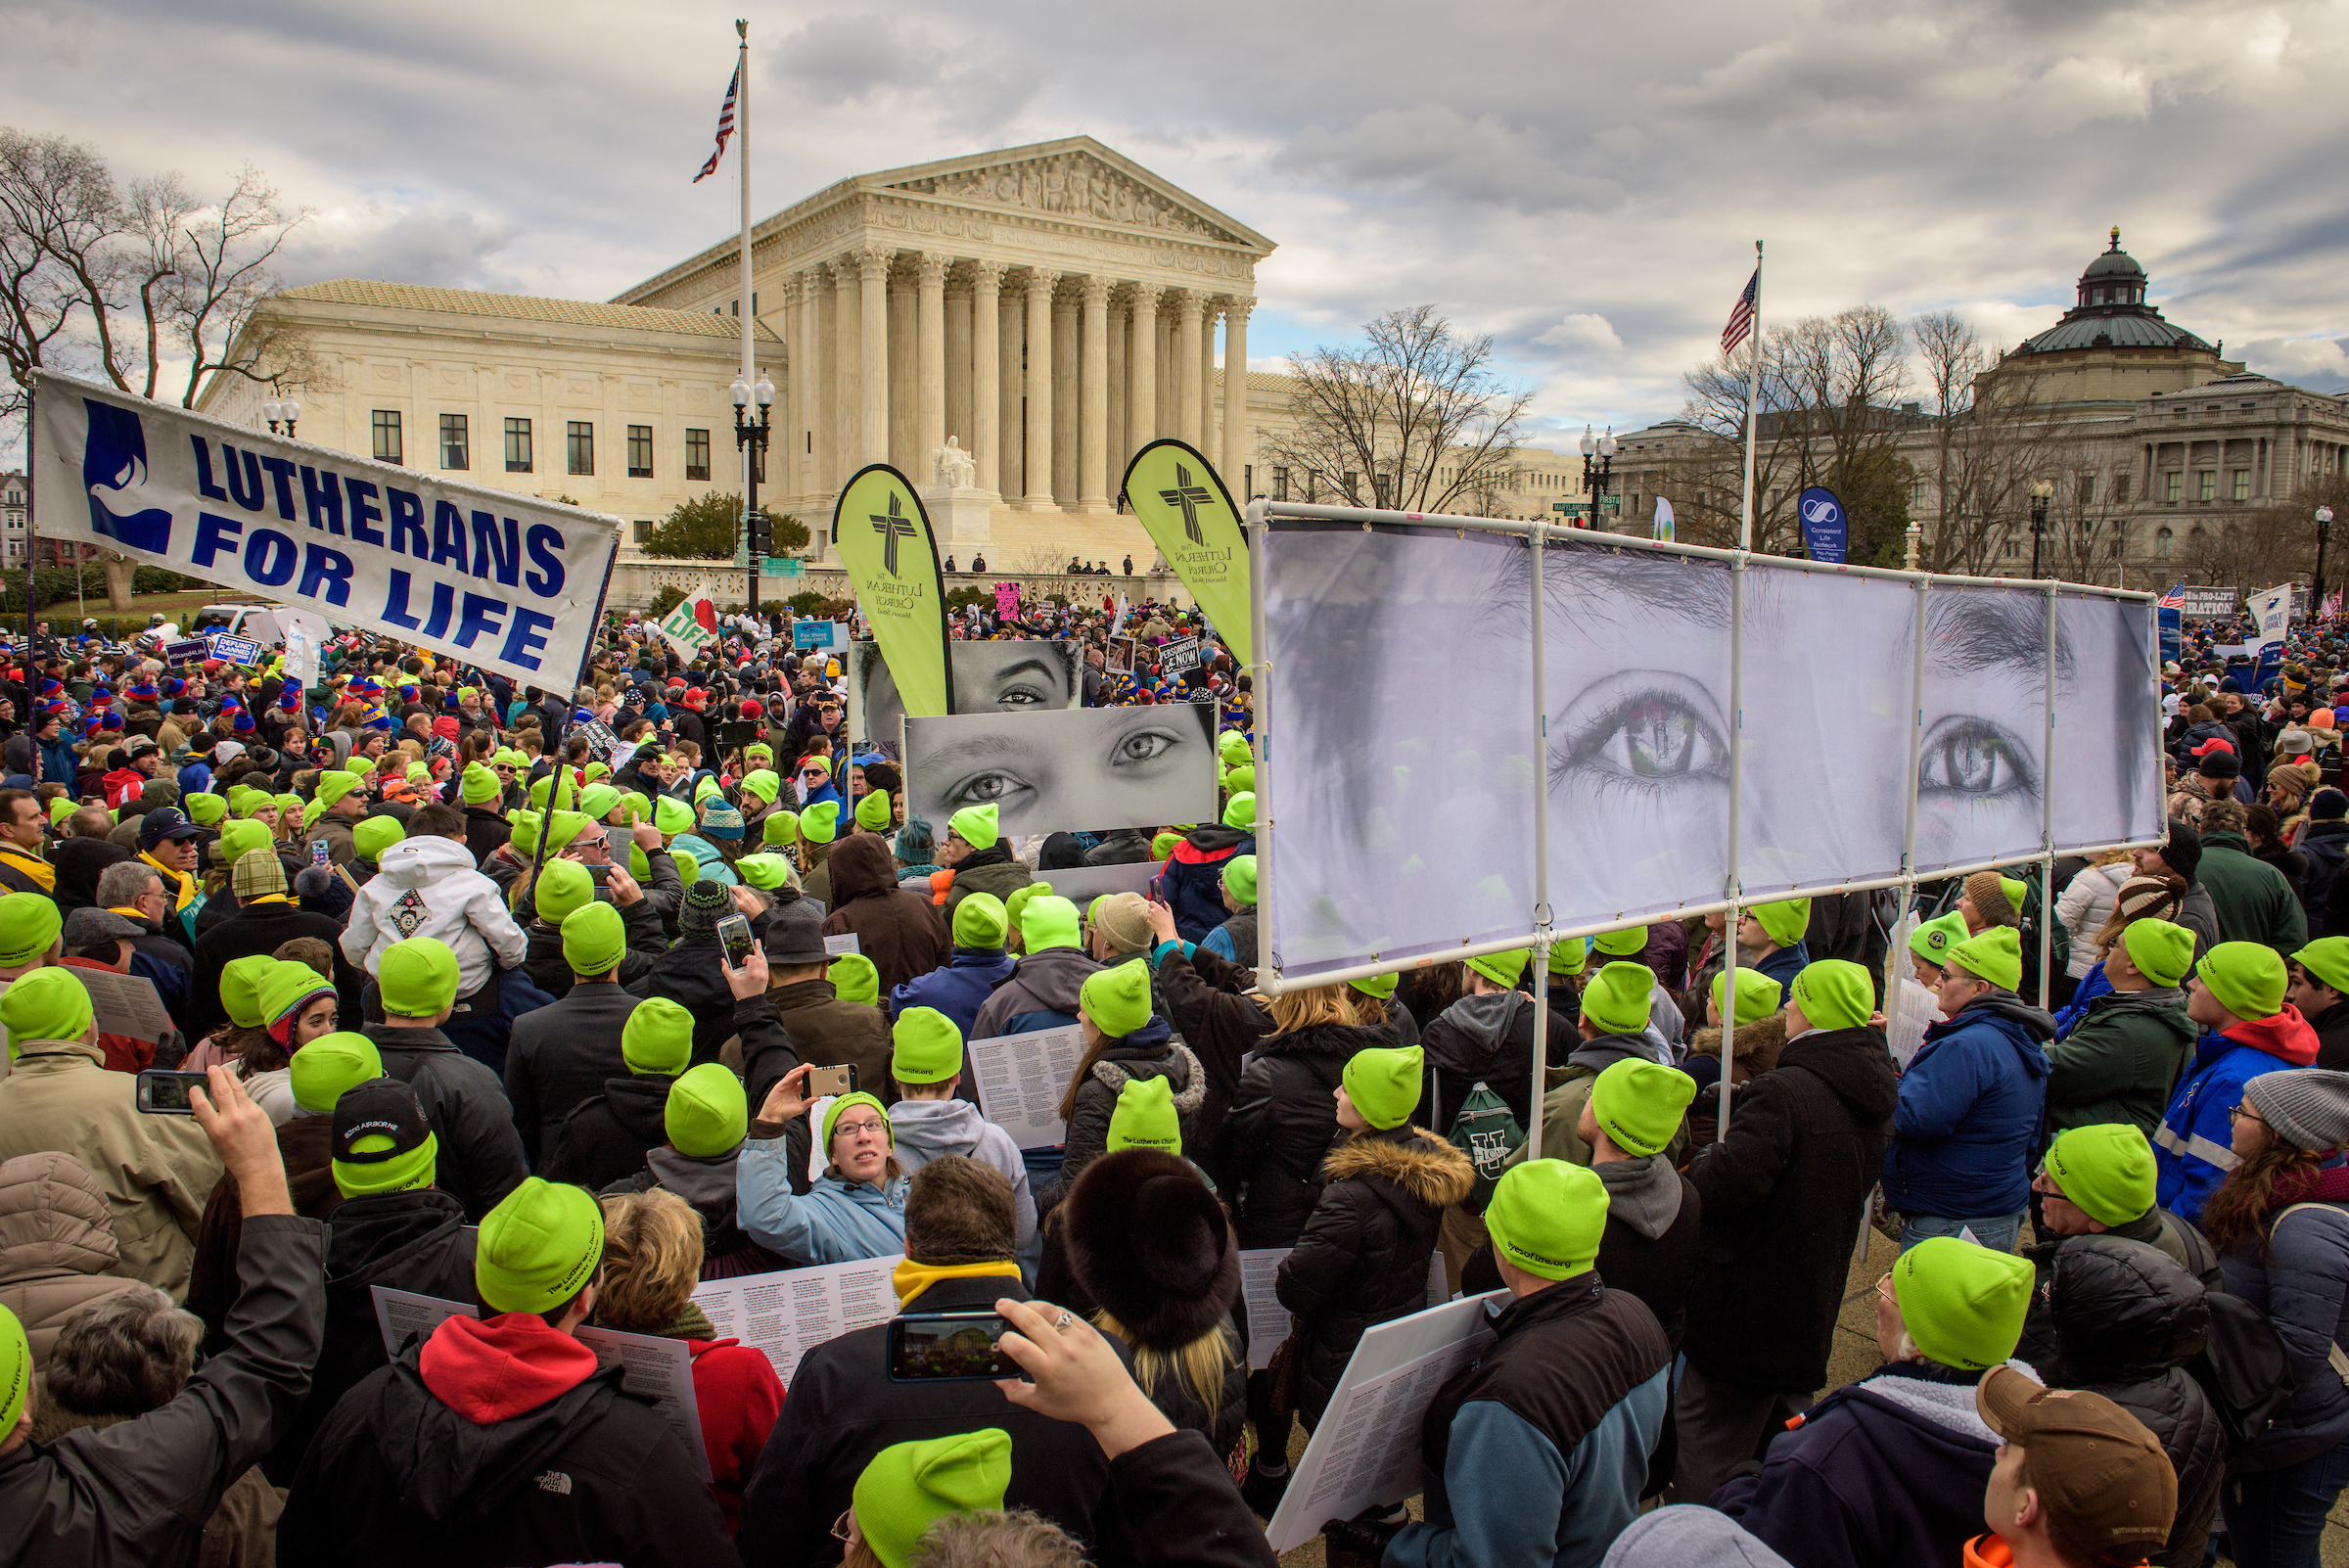 Lutherans gather in front of the U.S. Supreme Court following the March for Life 2017 on Friday, Jan. 27, 2017, in Washington, D.C. LCMS Communications/Erik M. Lunsford